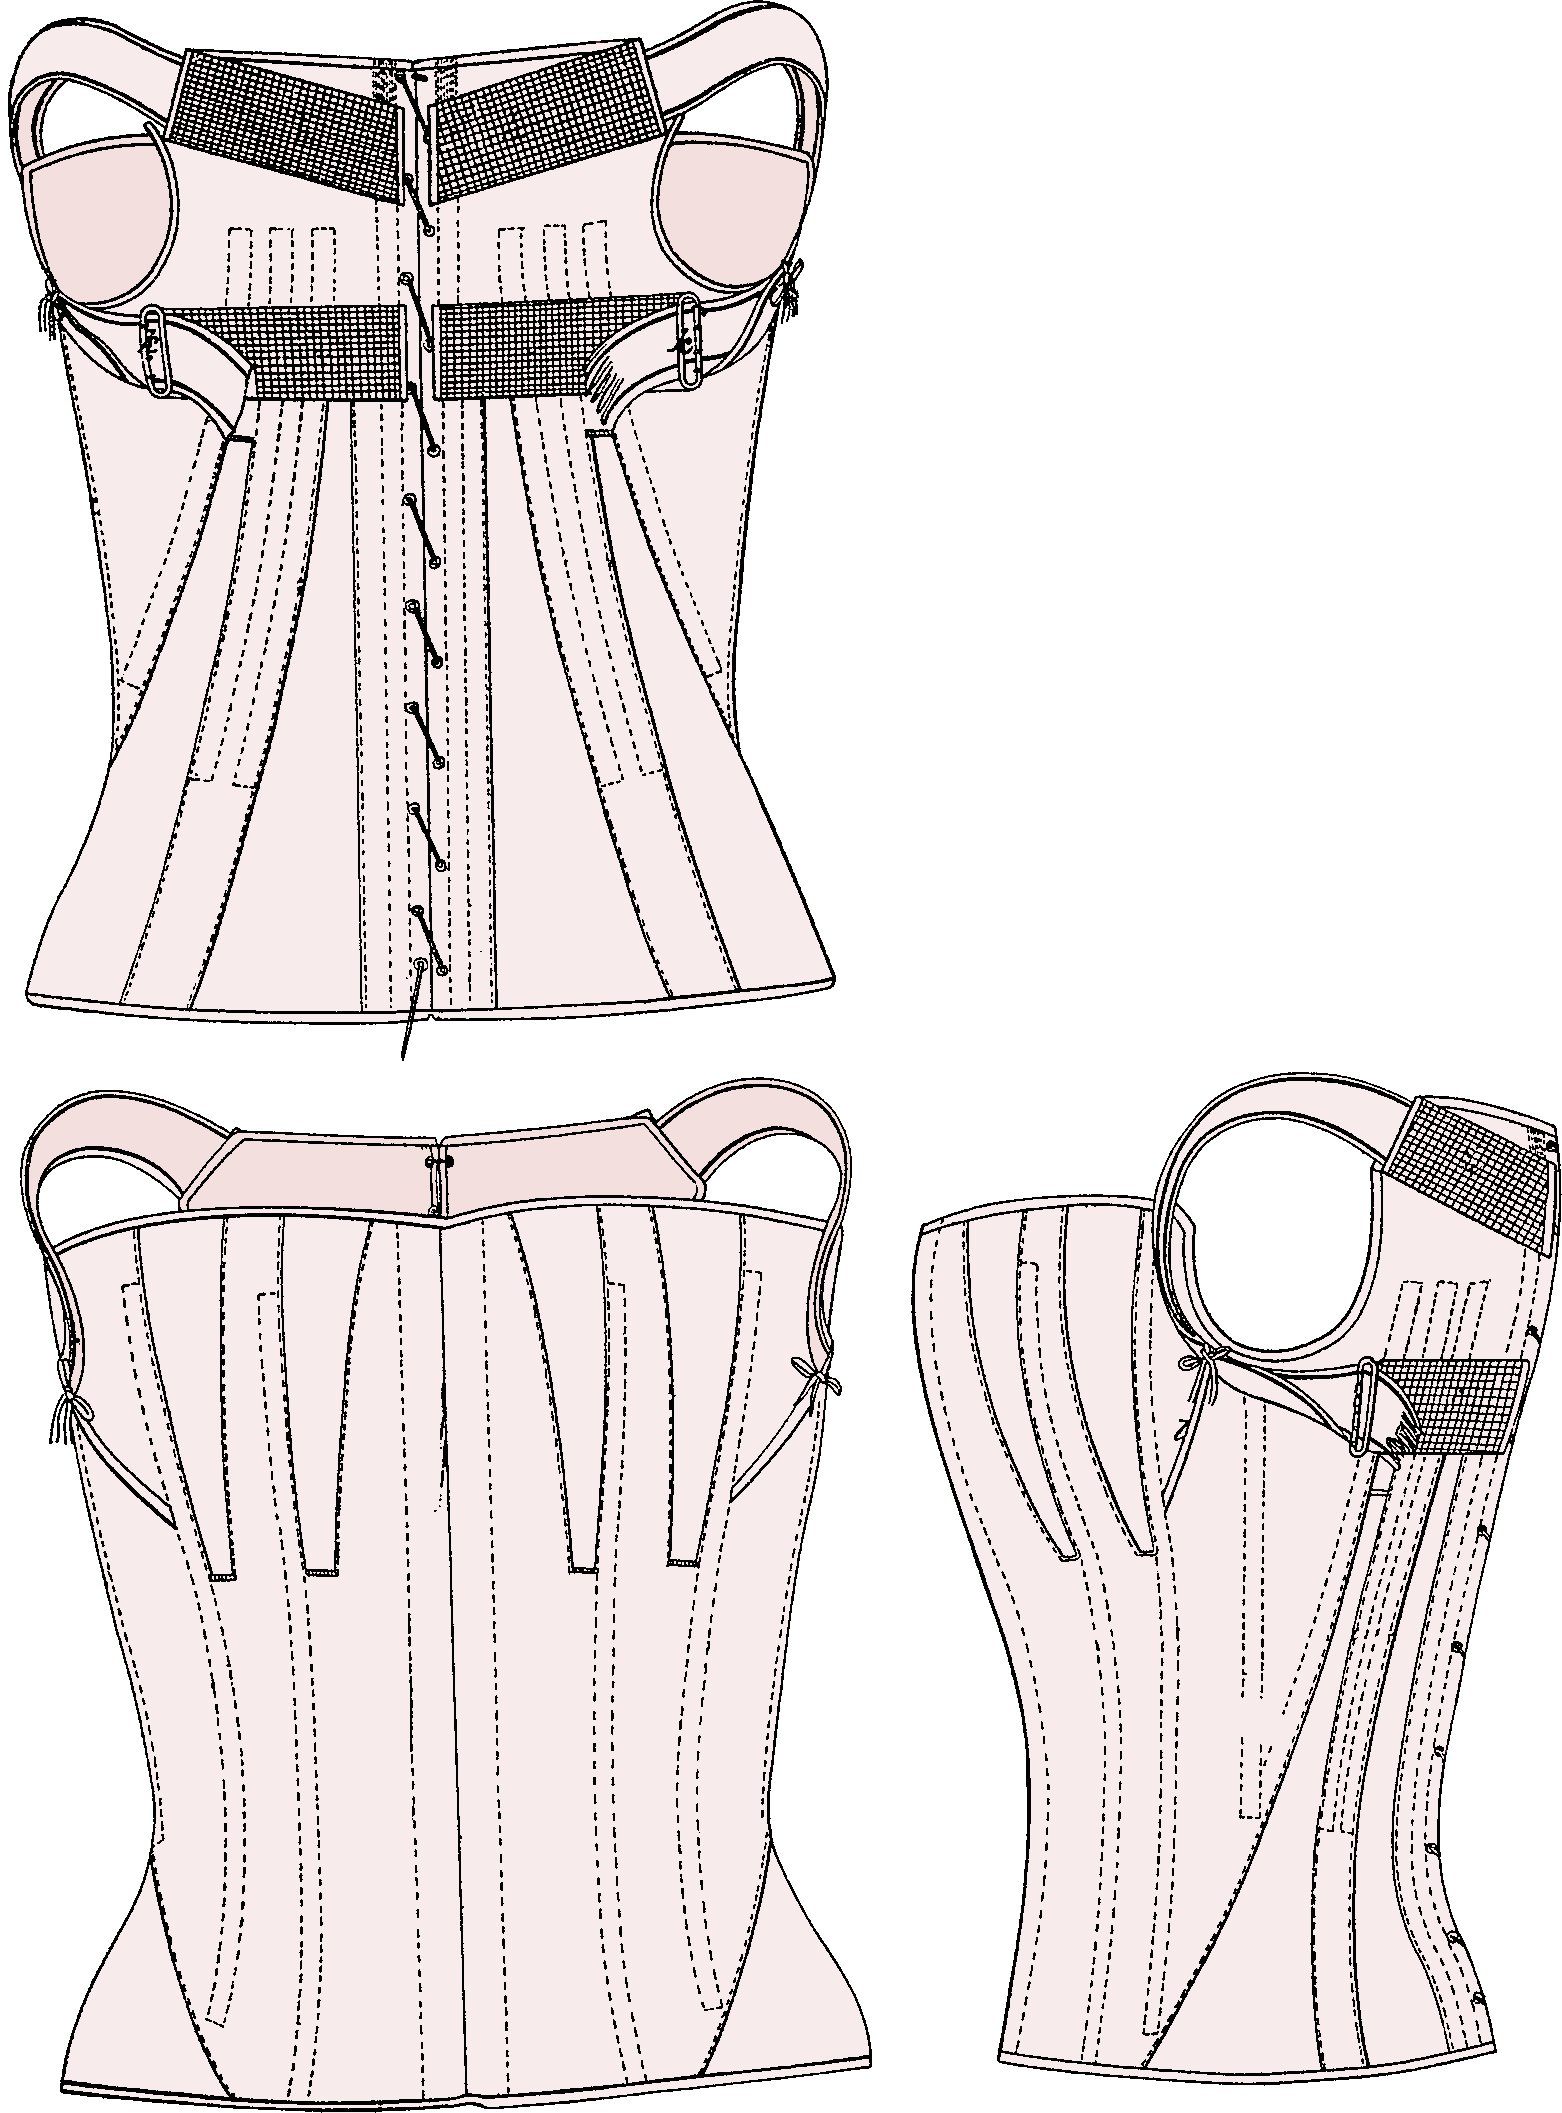 Pattern for a girl's corset in 1850. 